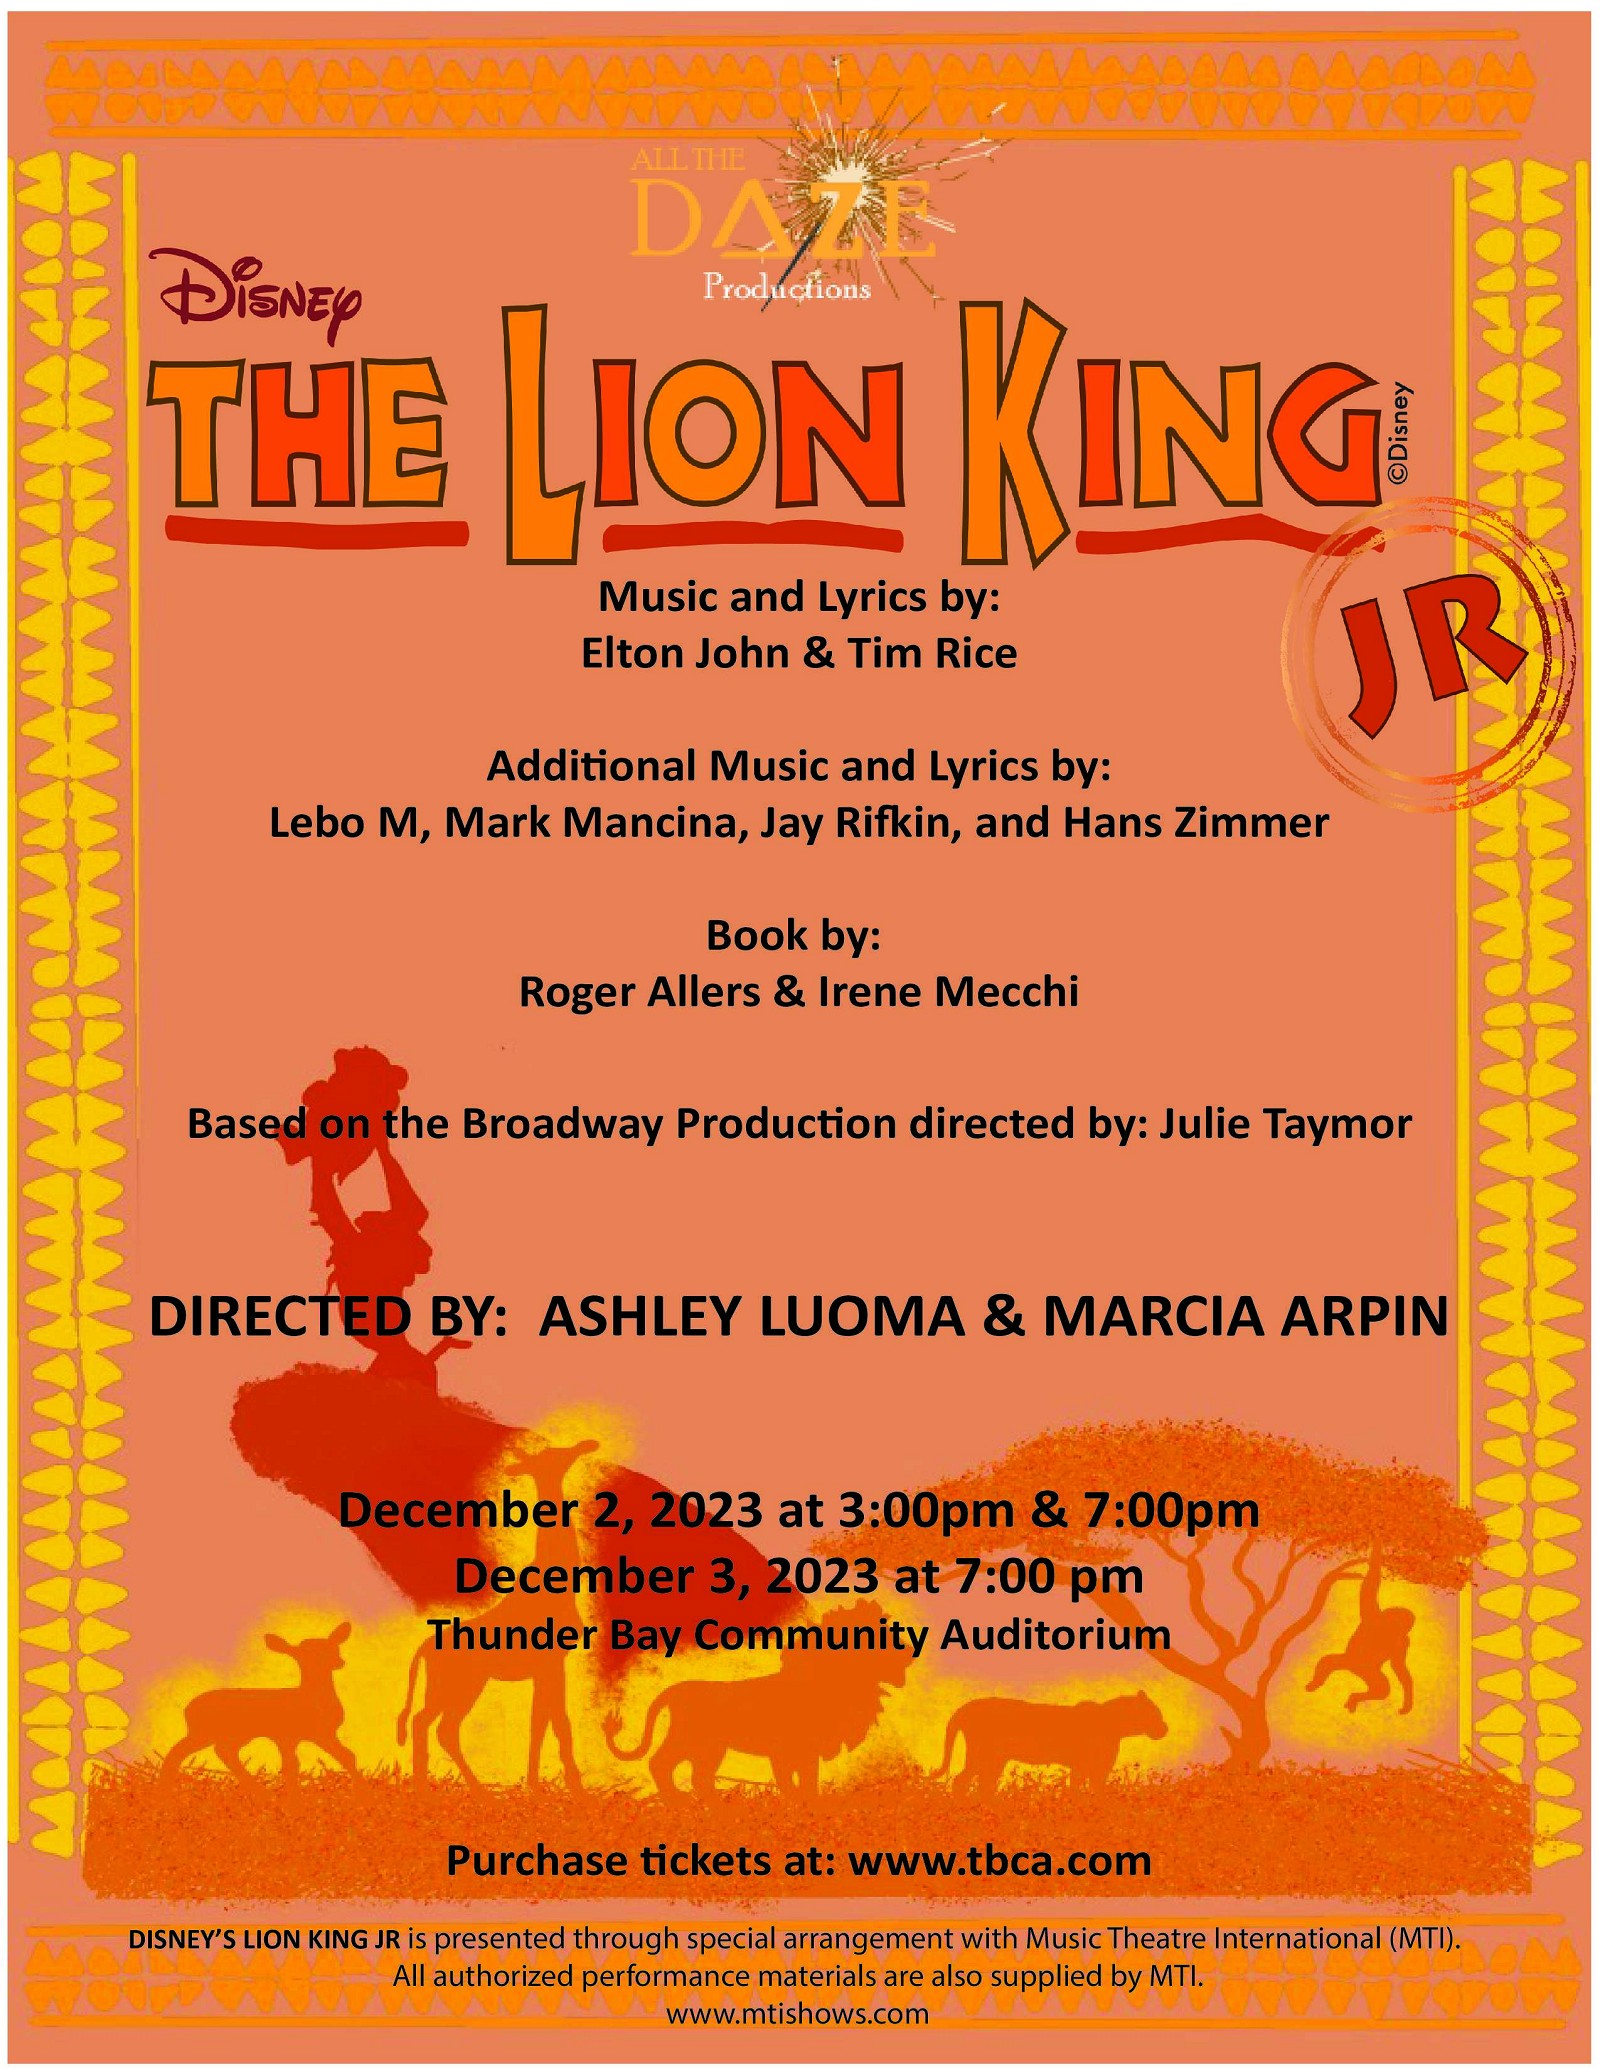 All The Daze Productions Presents The Lion King Jr.